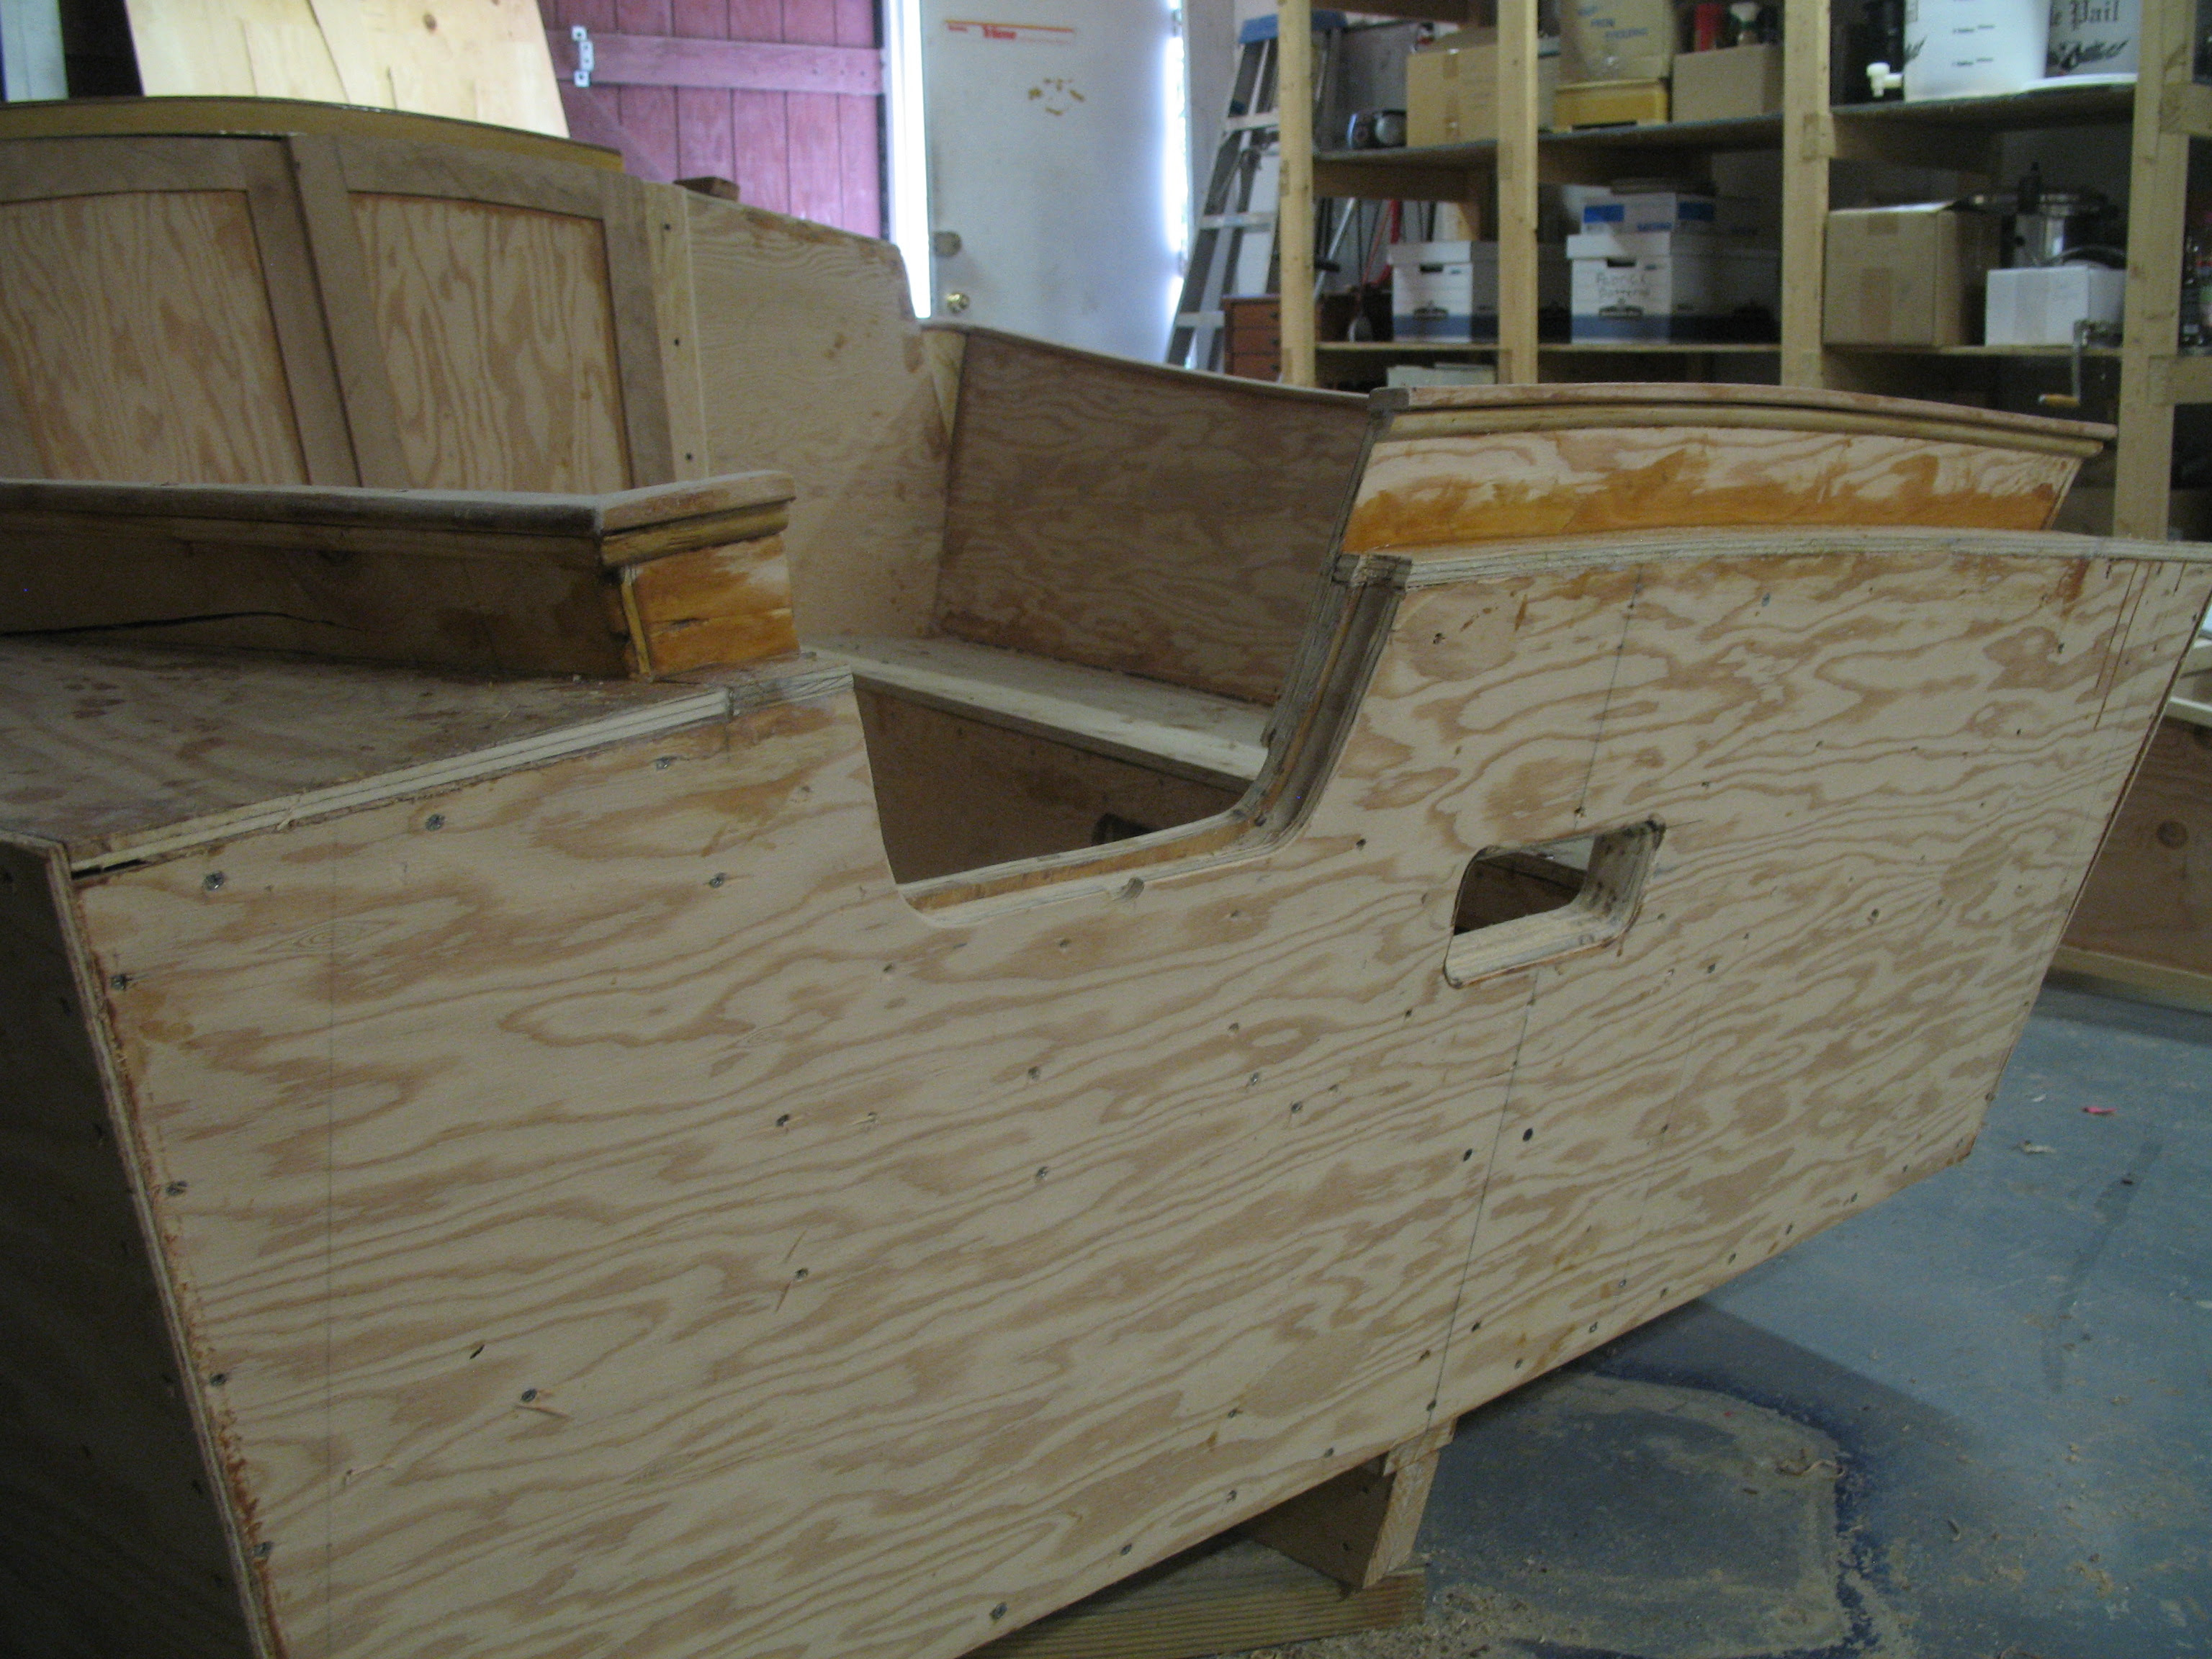 Building a plywood boat video Coll boat